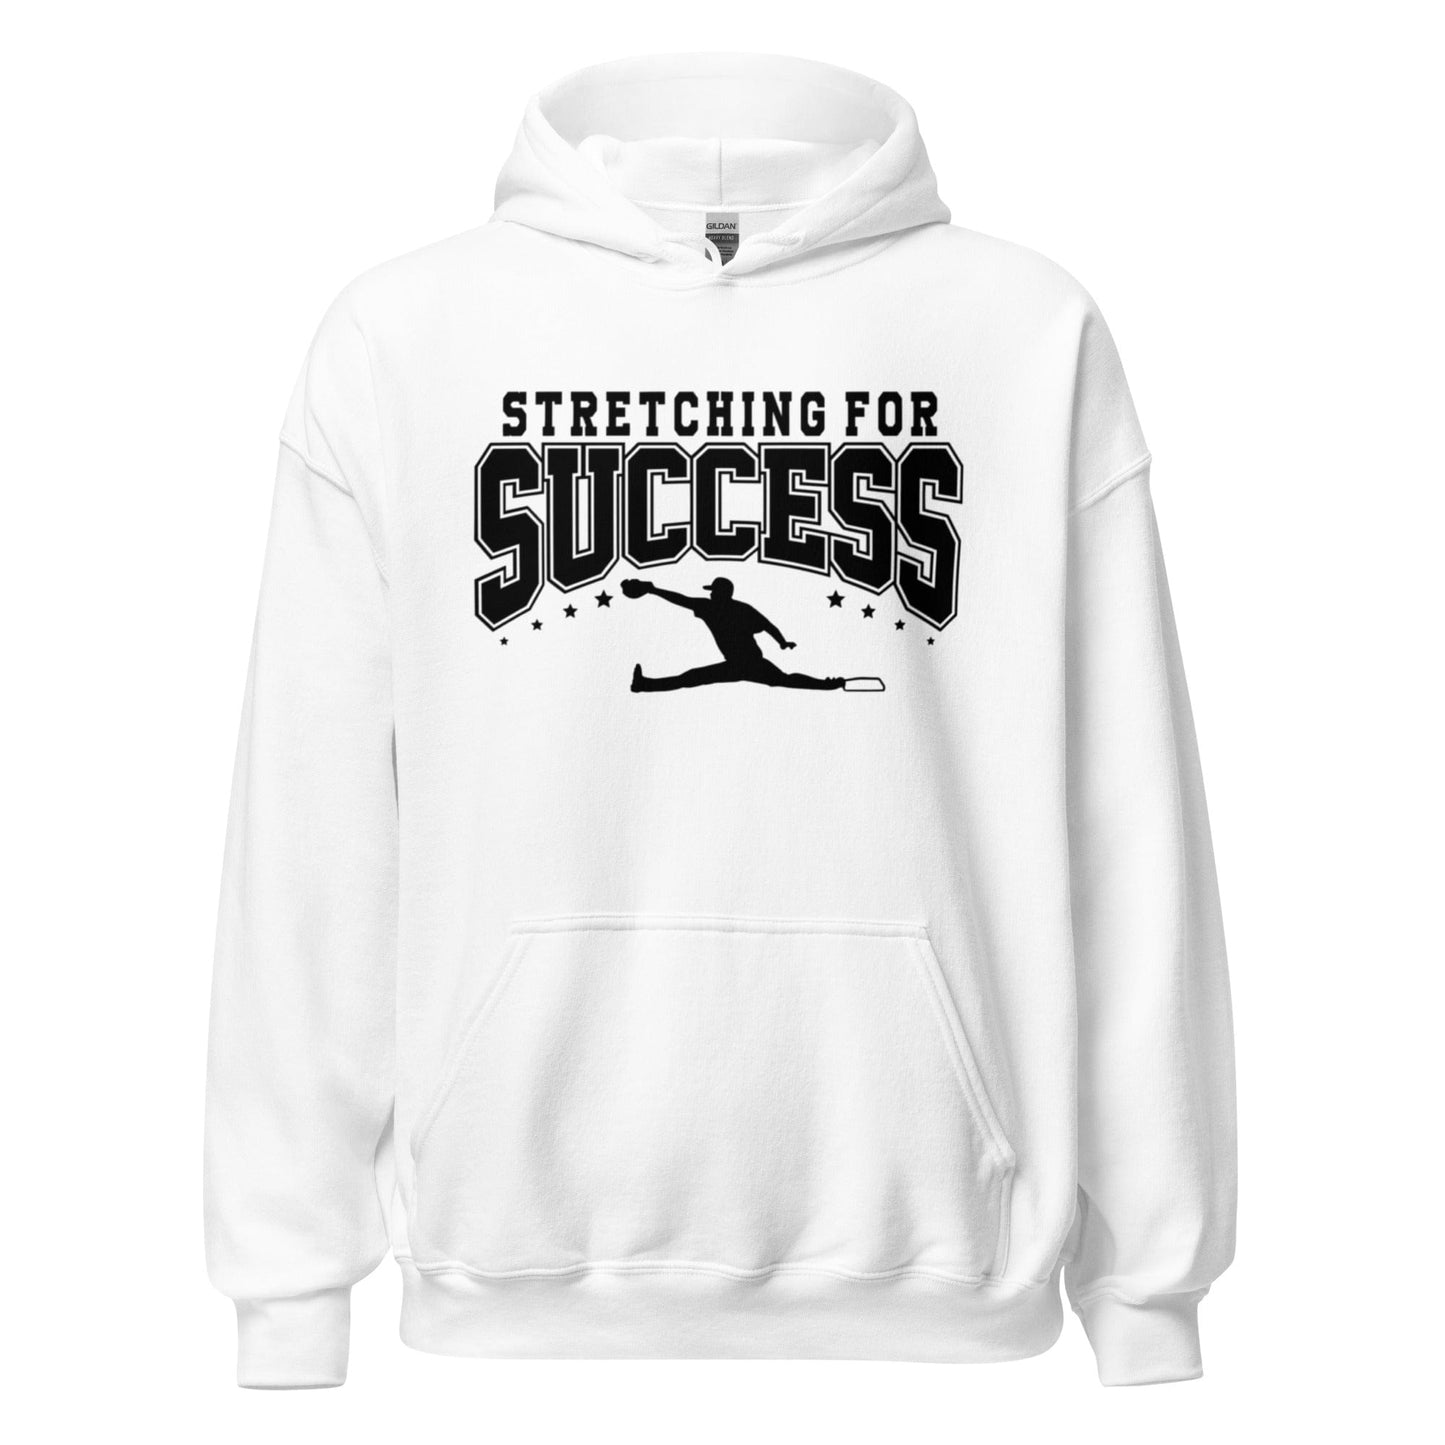 Stretching For Success - Adult Hoodie